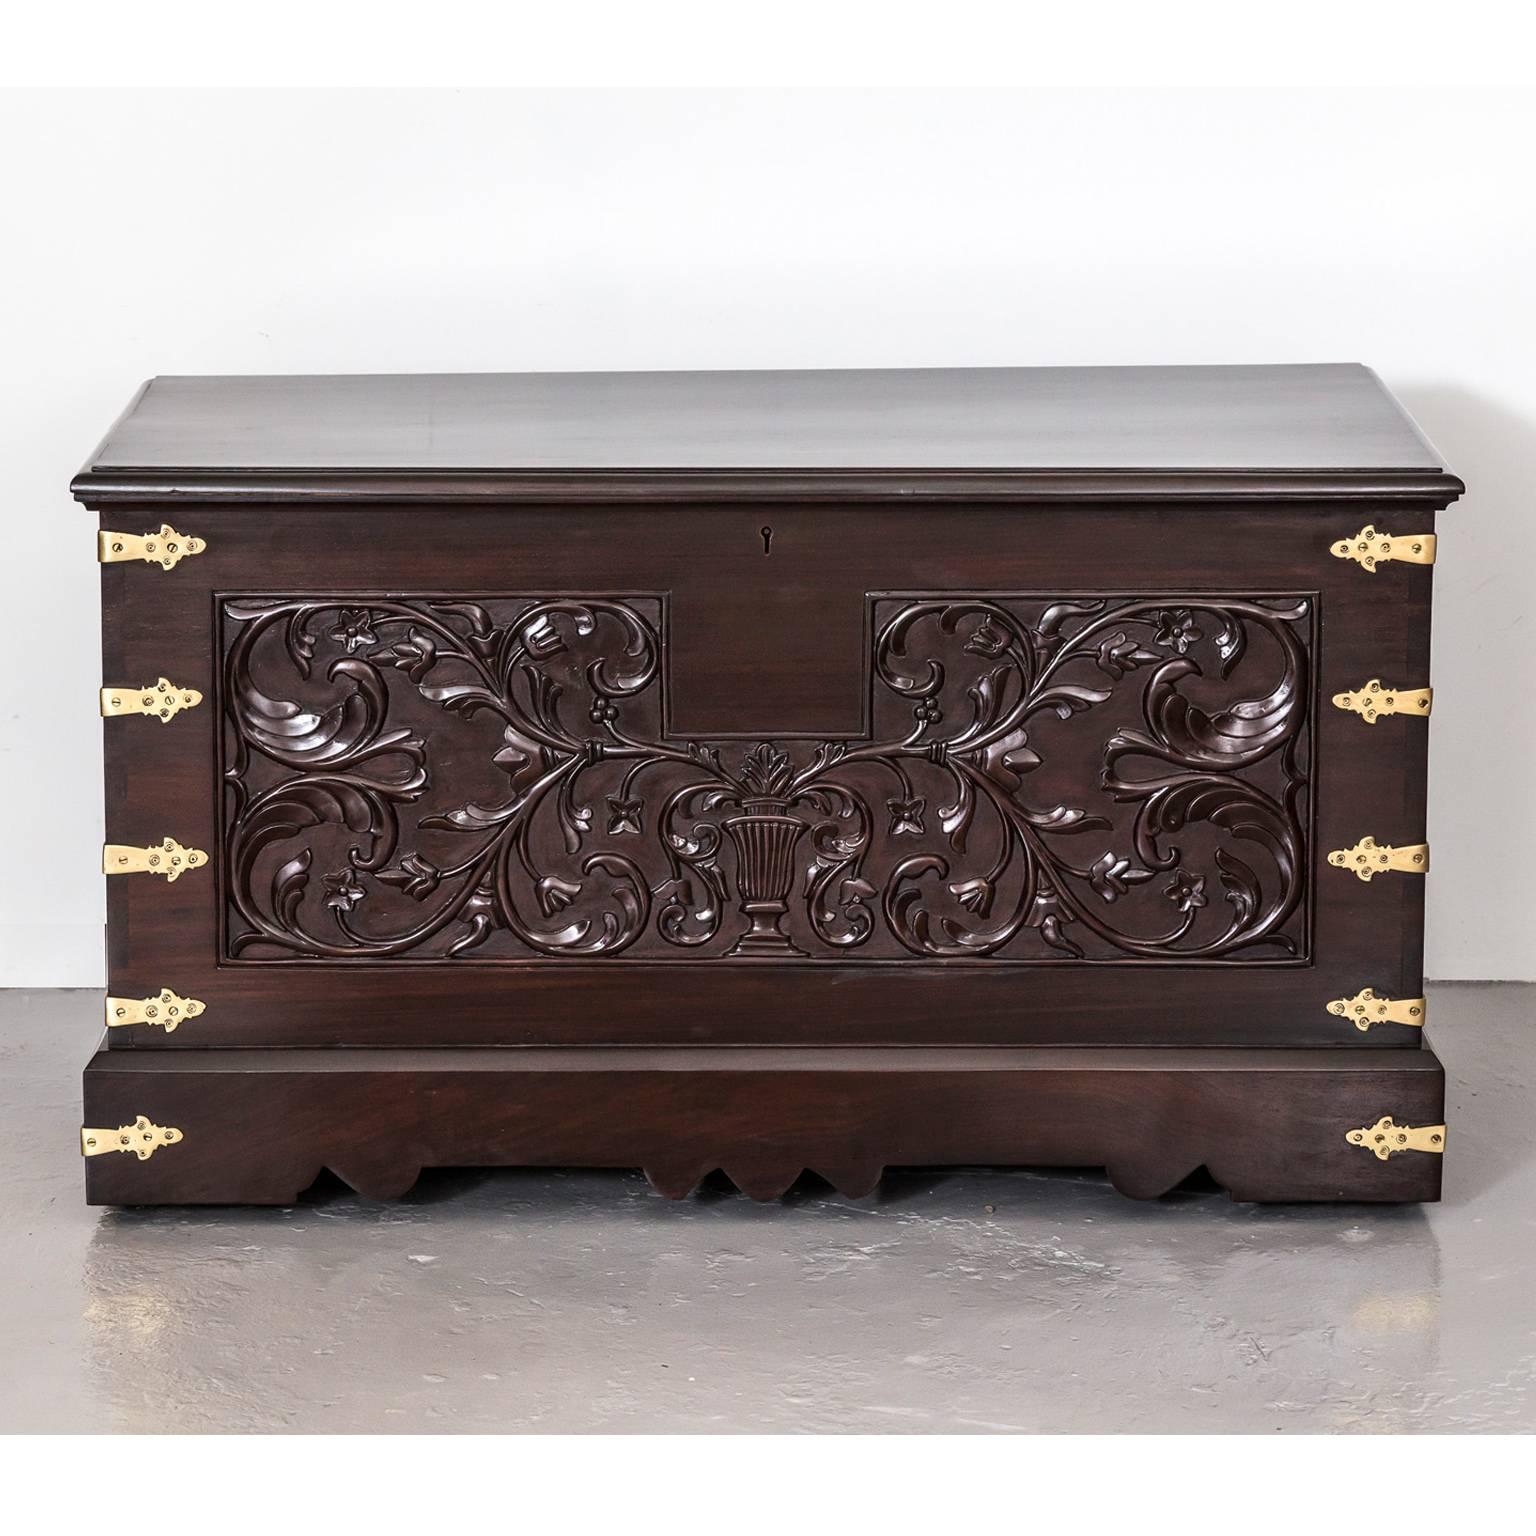 A beautiful Portuguese colonial, so called “Malabar chest” in rosewood. The piece is both decorated and strengthened by vertical brass strips and flattened cusps fixed at intervals round the sides. The front features a carving of curvaceous leafy